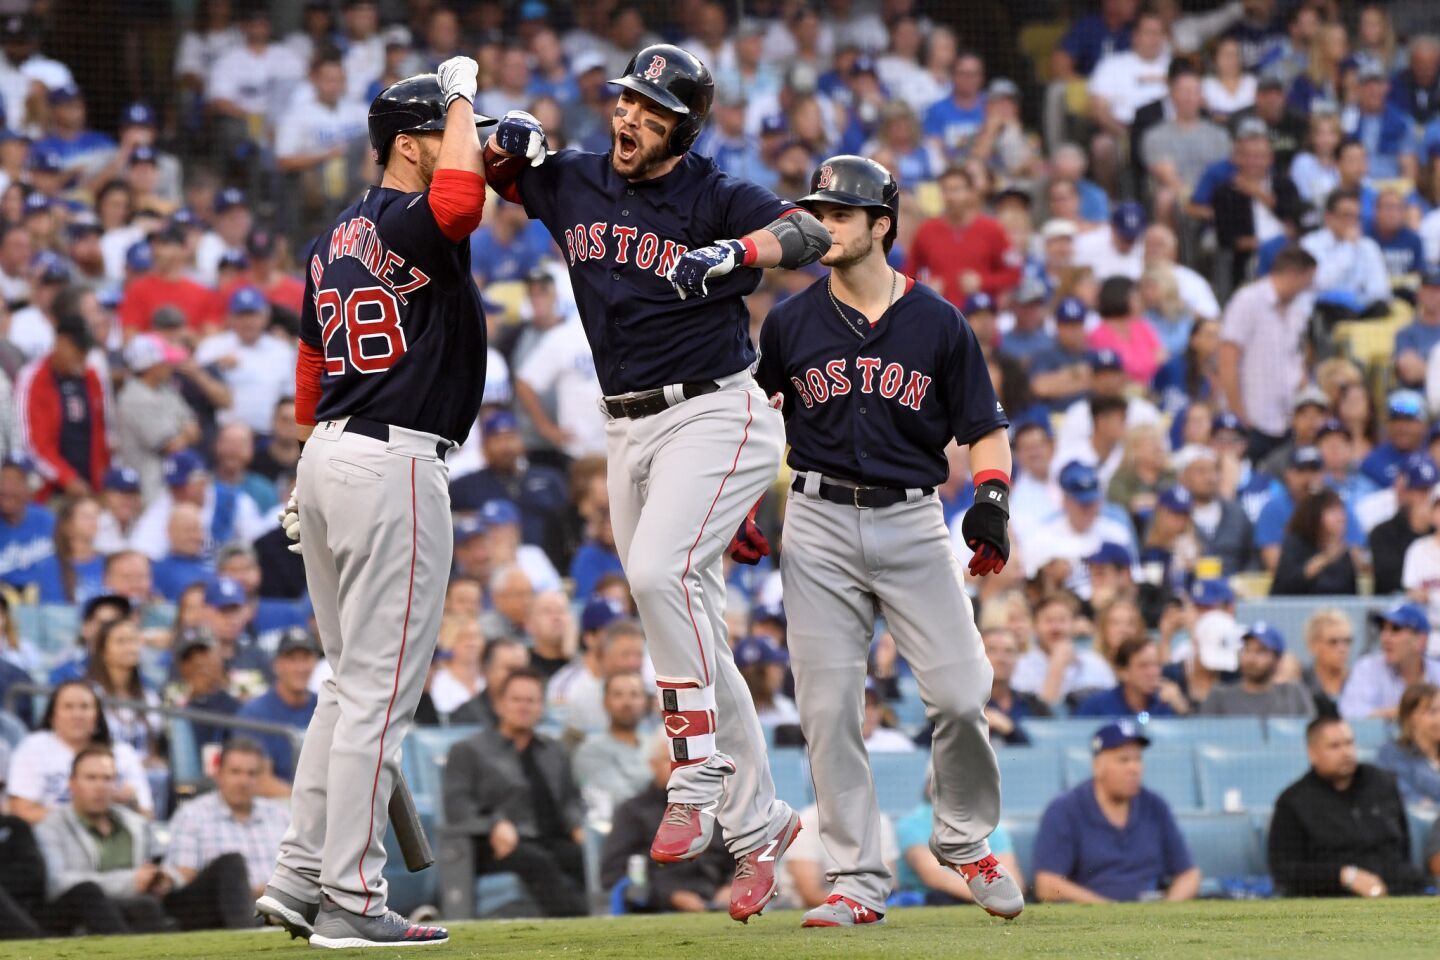 Red Sox Steve Pearce, center, celebrates his two-run home run aganinst the Dodgers in the 1st inning.